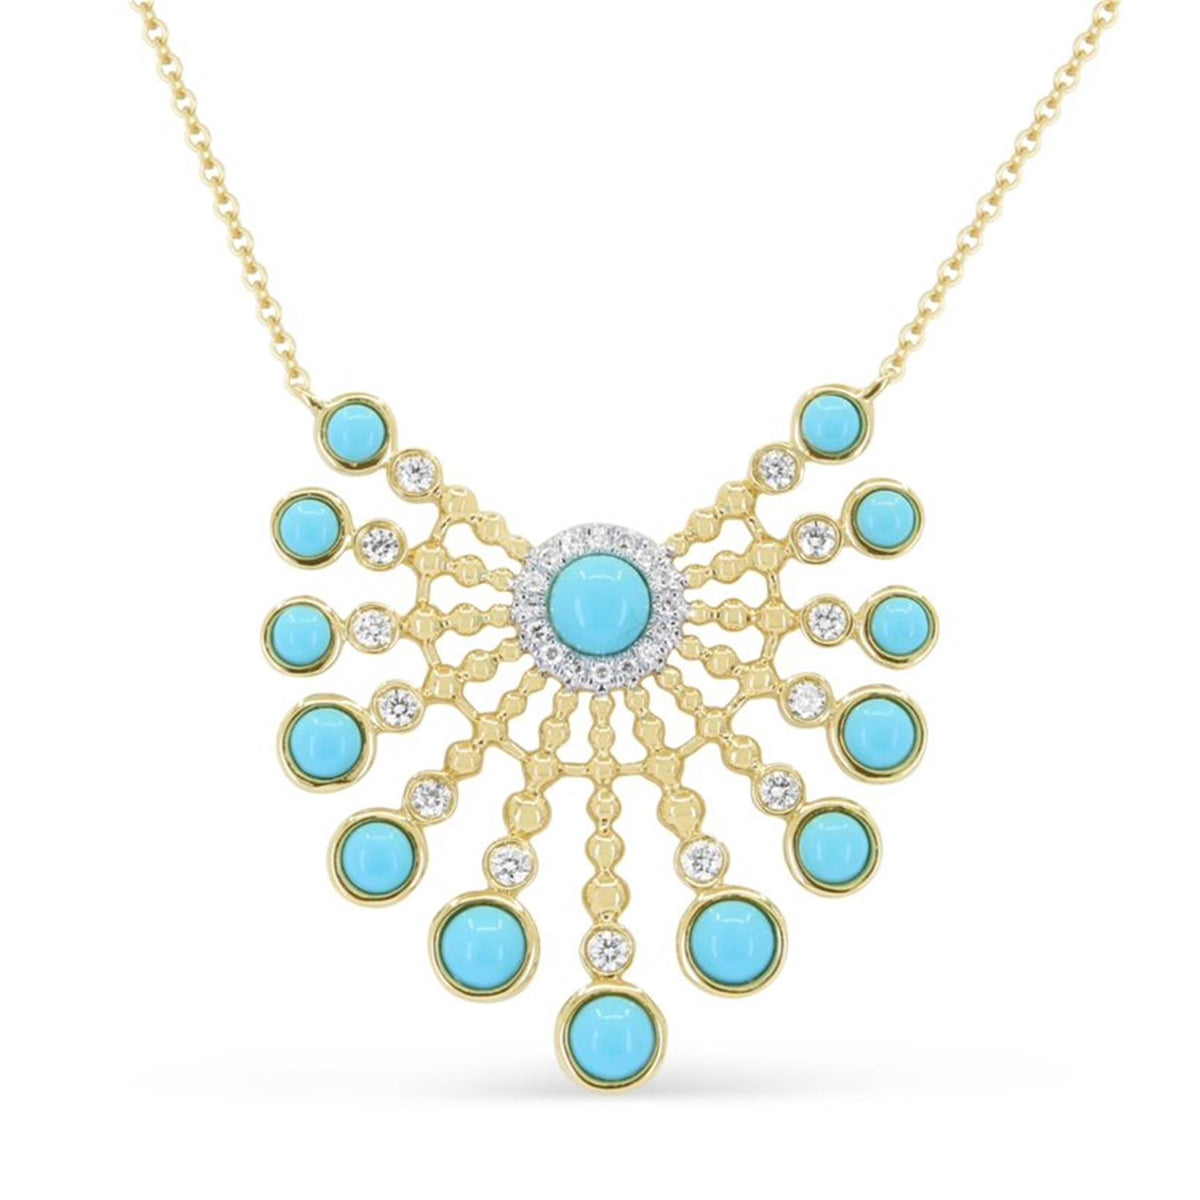 14Kt Yellow Gold Pendant With Turquoise And Diamonds